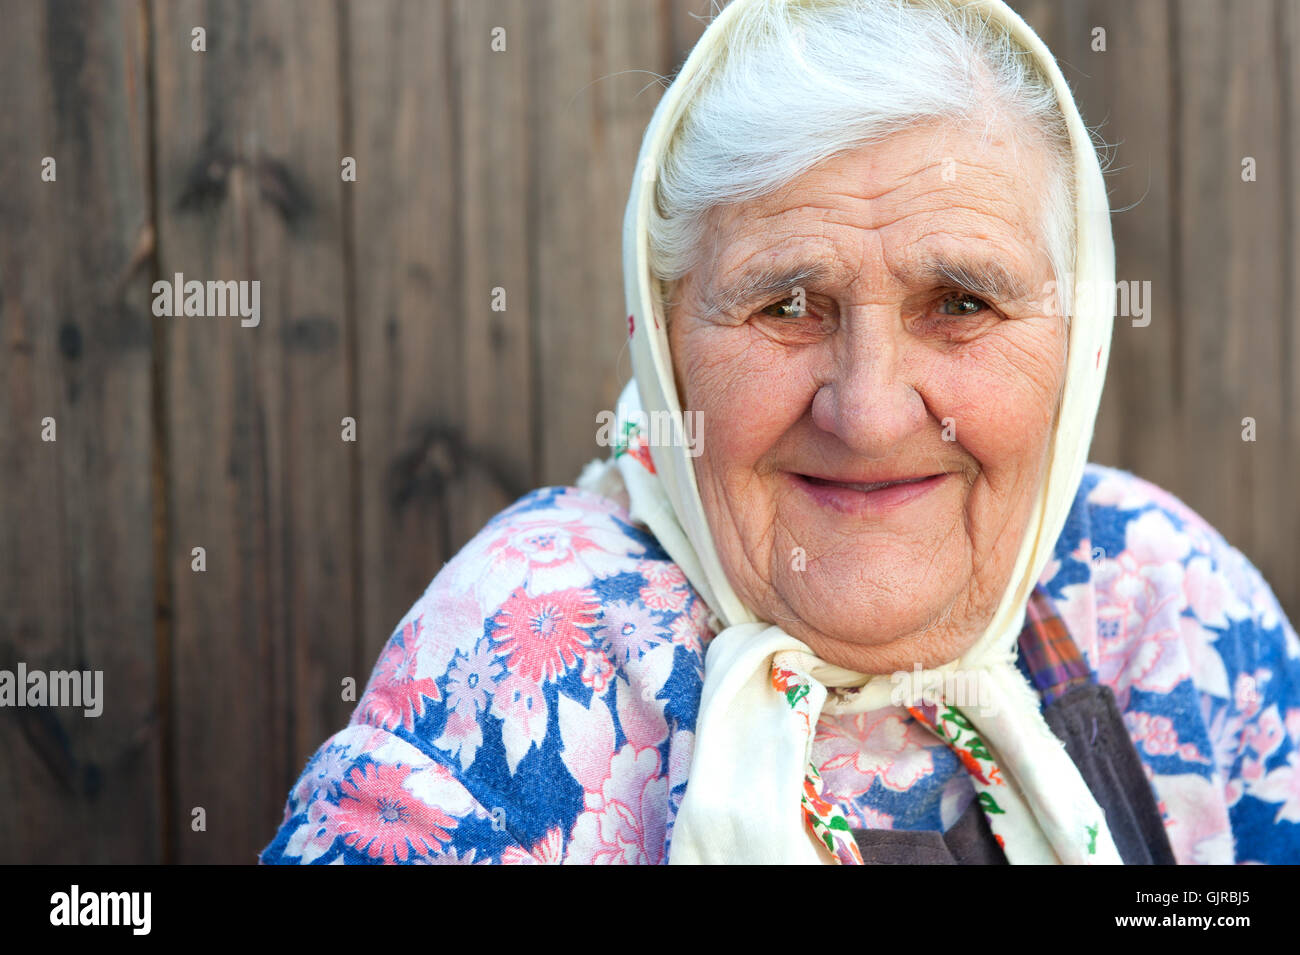 The old woman age 84 years Stock Photo